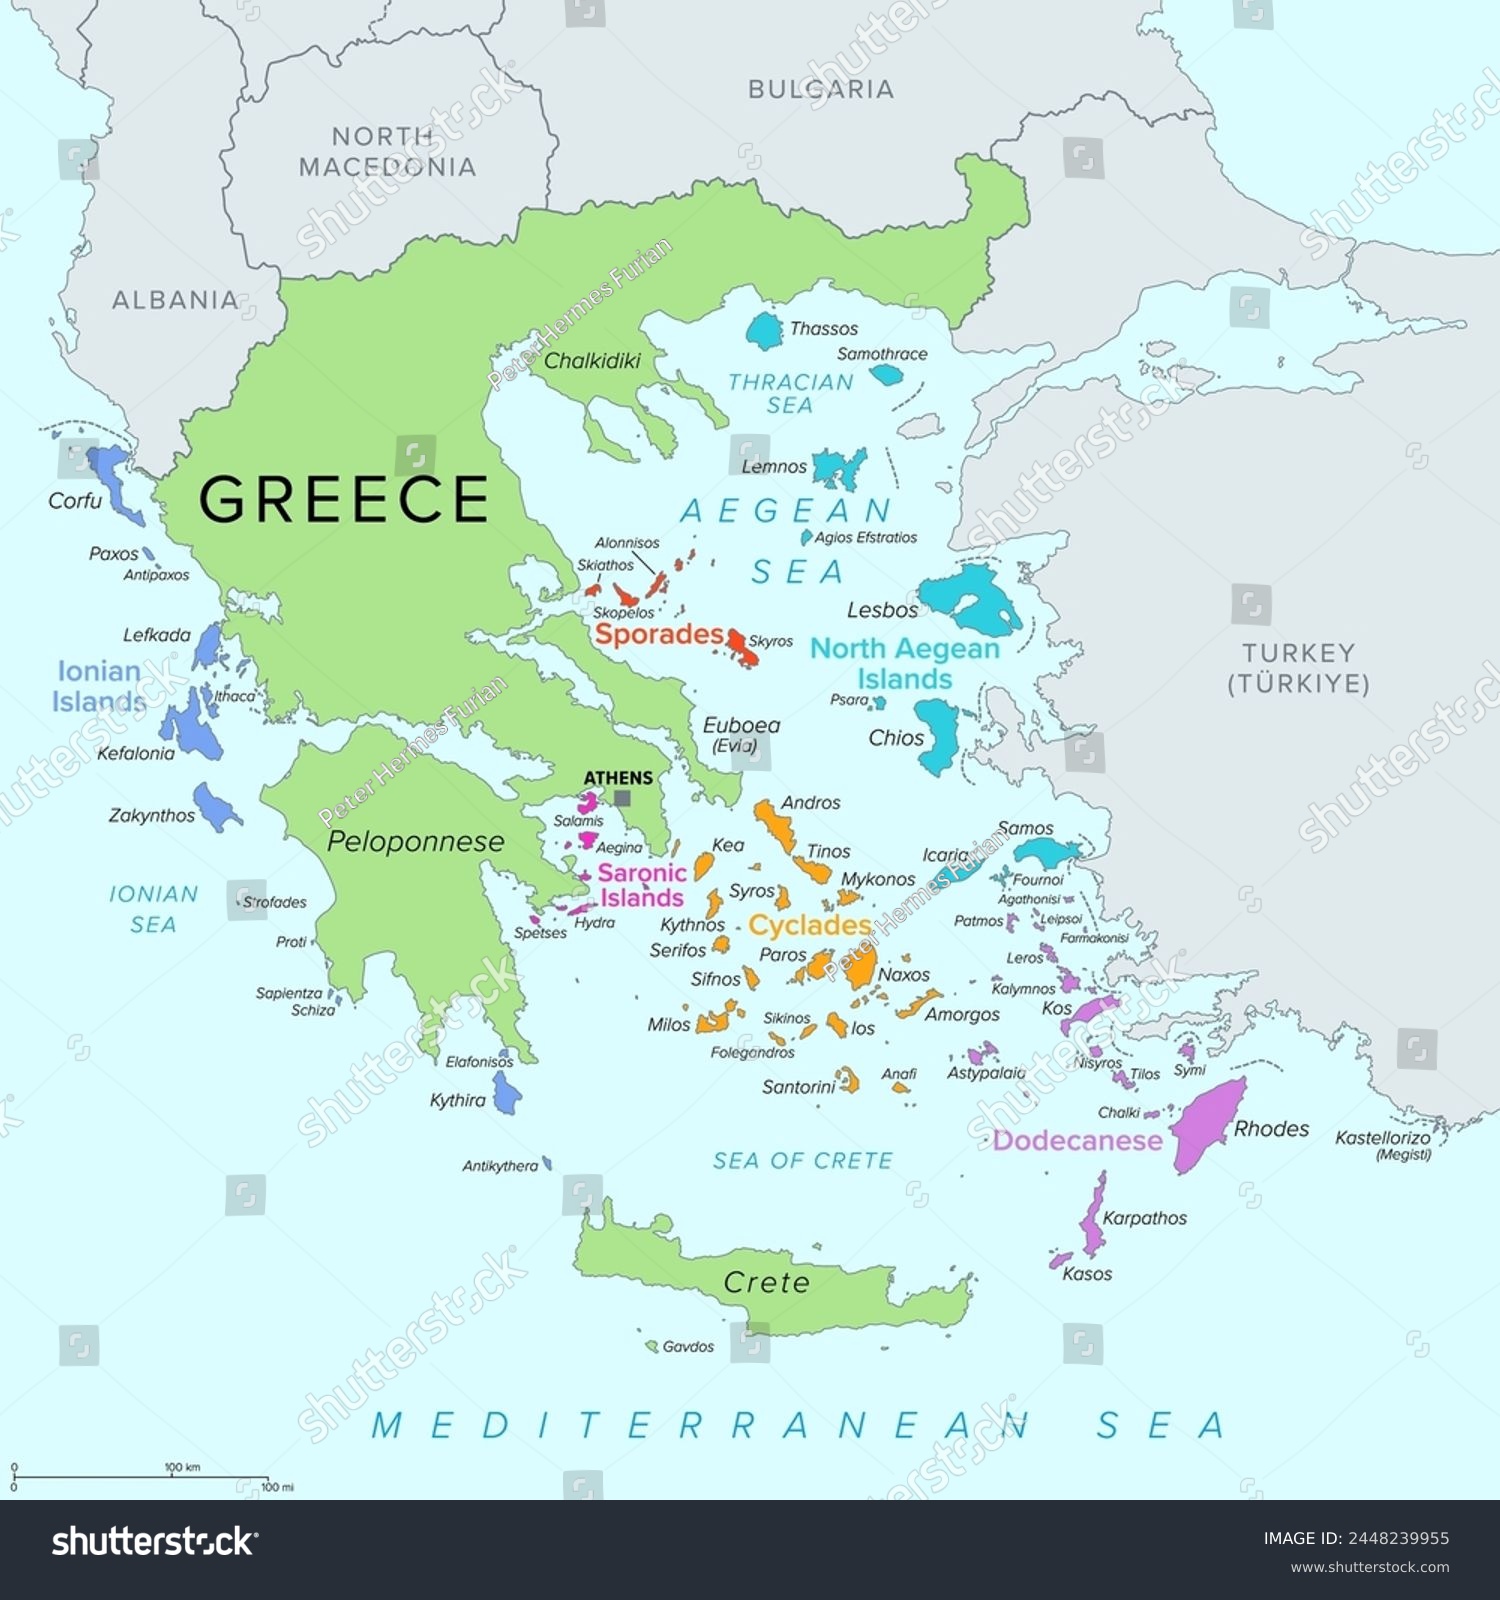 SVG of Islands of Greece, political map. Greek islands groups and clusters. The Cyclades, Dodecanese, Sporades, North Aegean and Saronic Islands lying in the Aegean Sea, the Ionian Islands in the Ionian Sea. svg